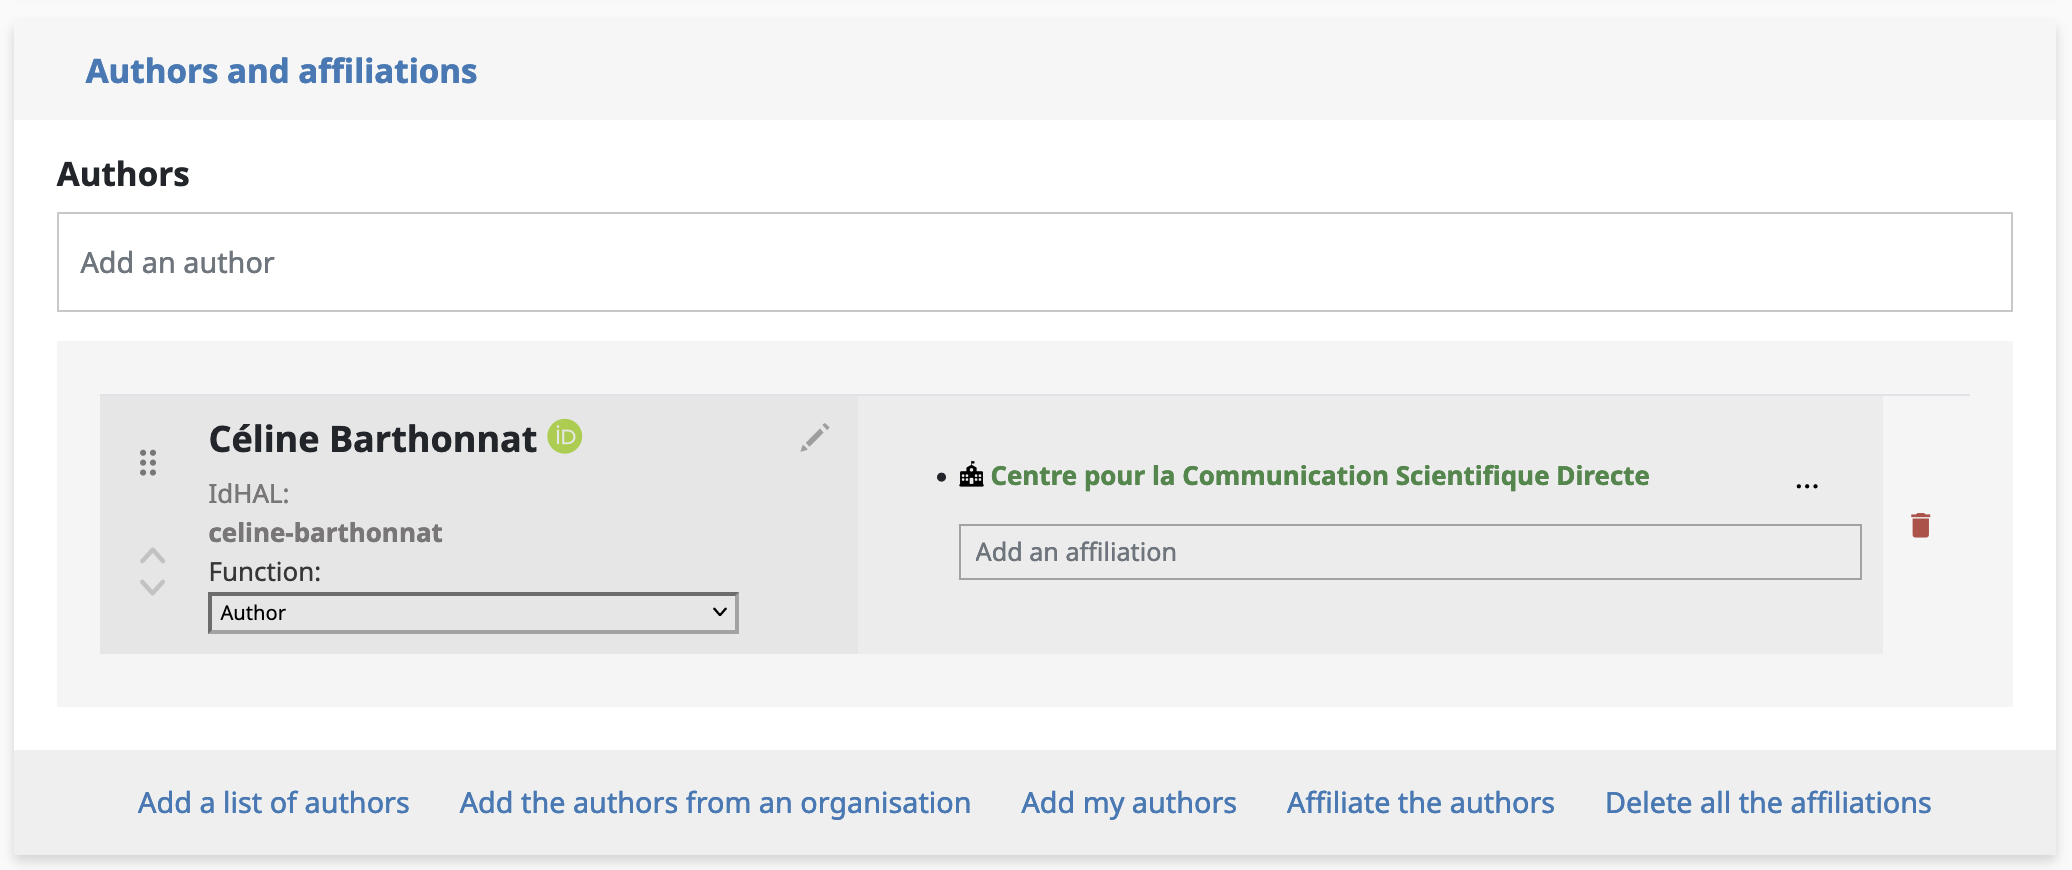 adding the author and the affiliation